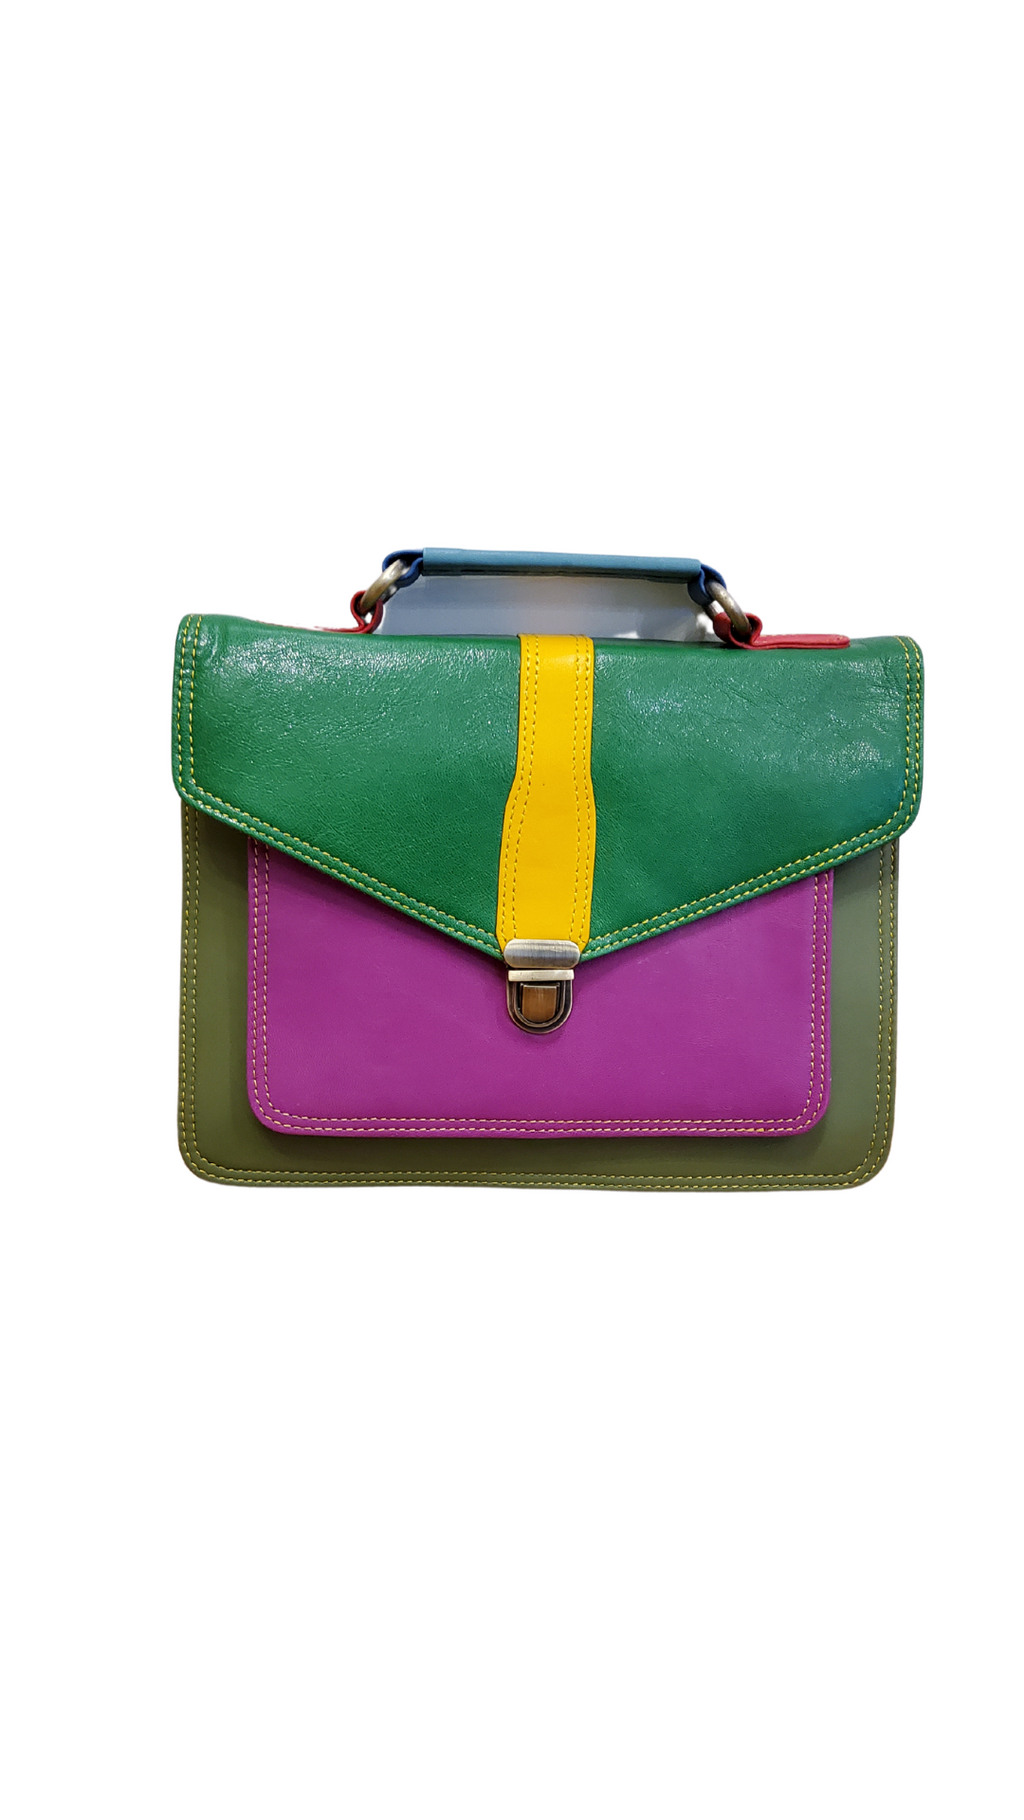 Green and purple leather crossbody bag